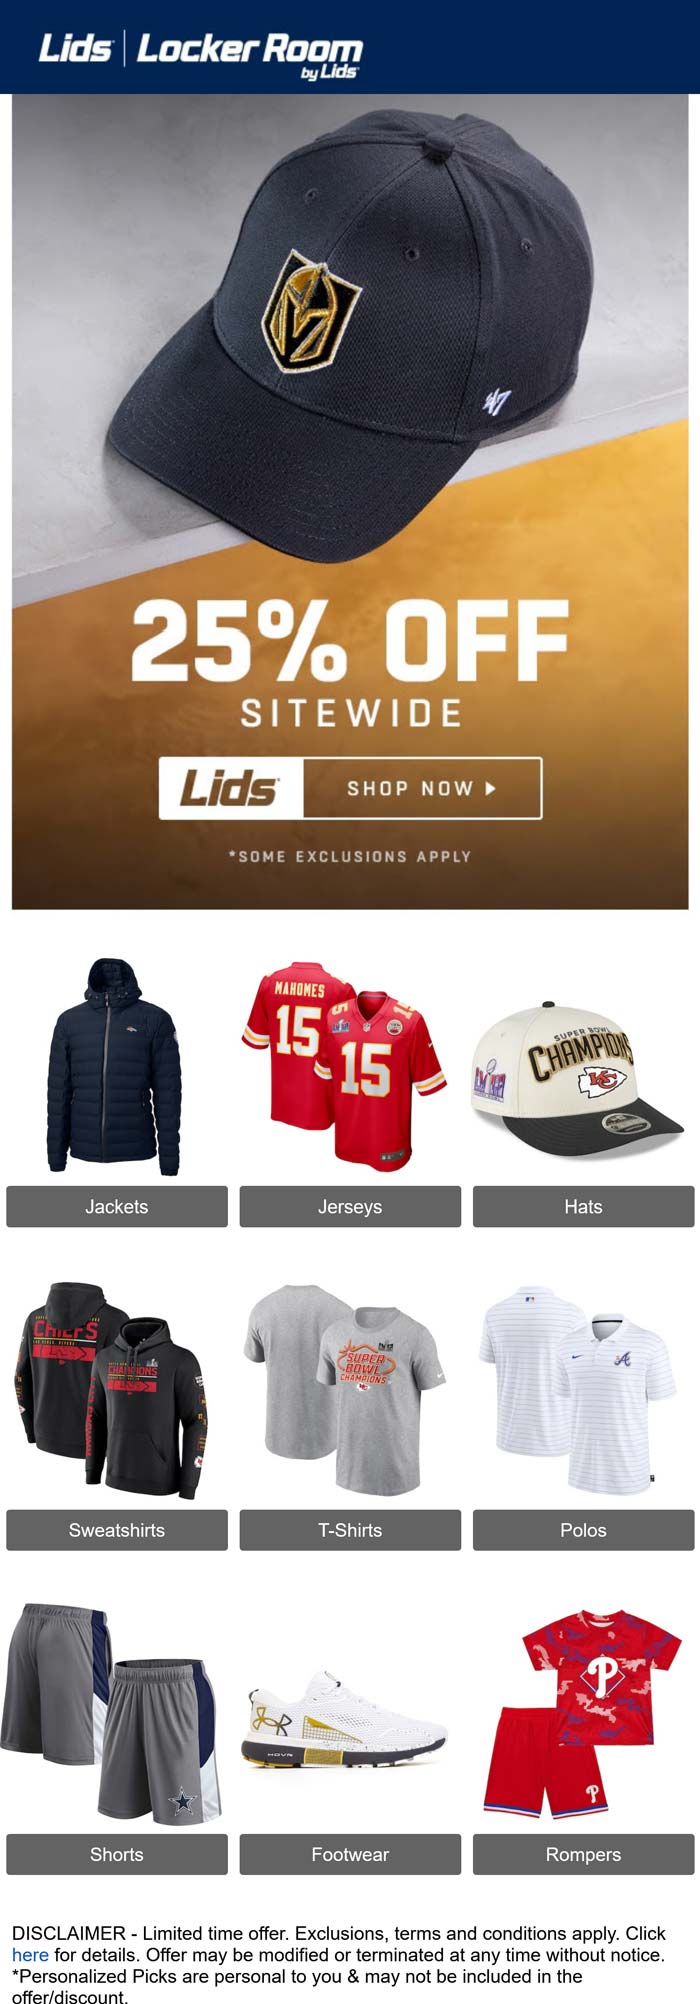 Lids stores Coupon  25% off everything today at Lids via promo code LIDS25 #lids 